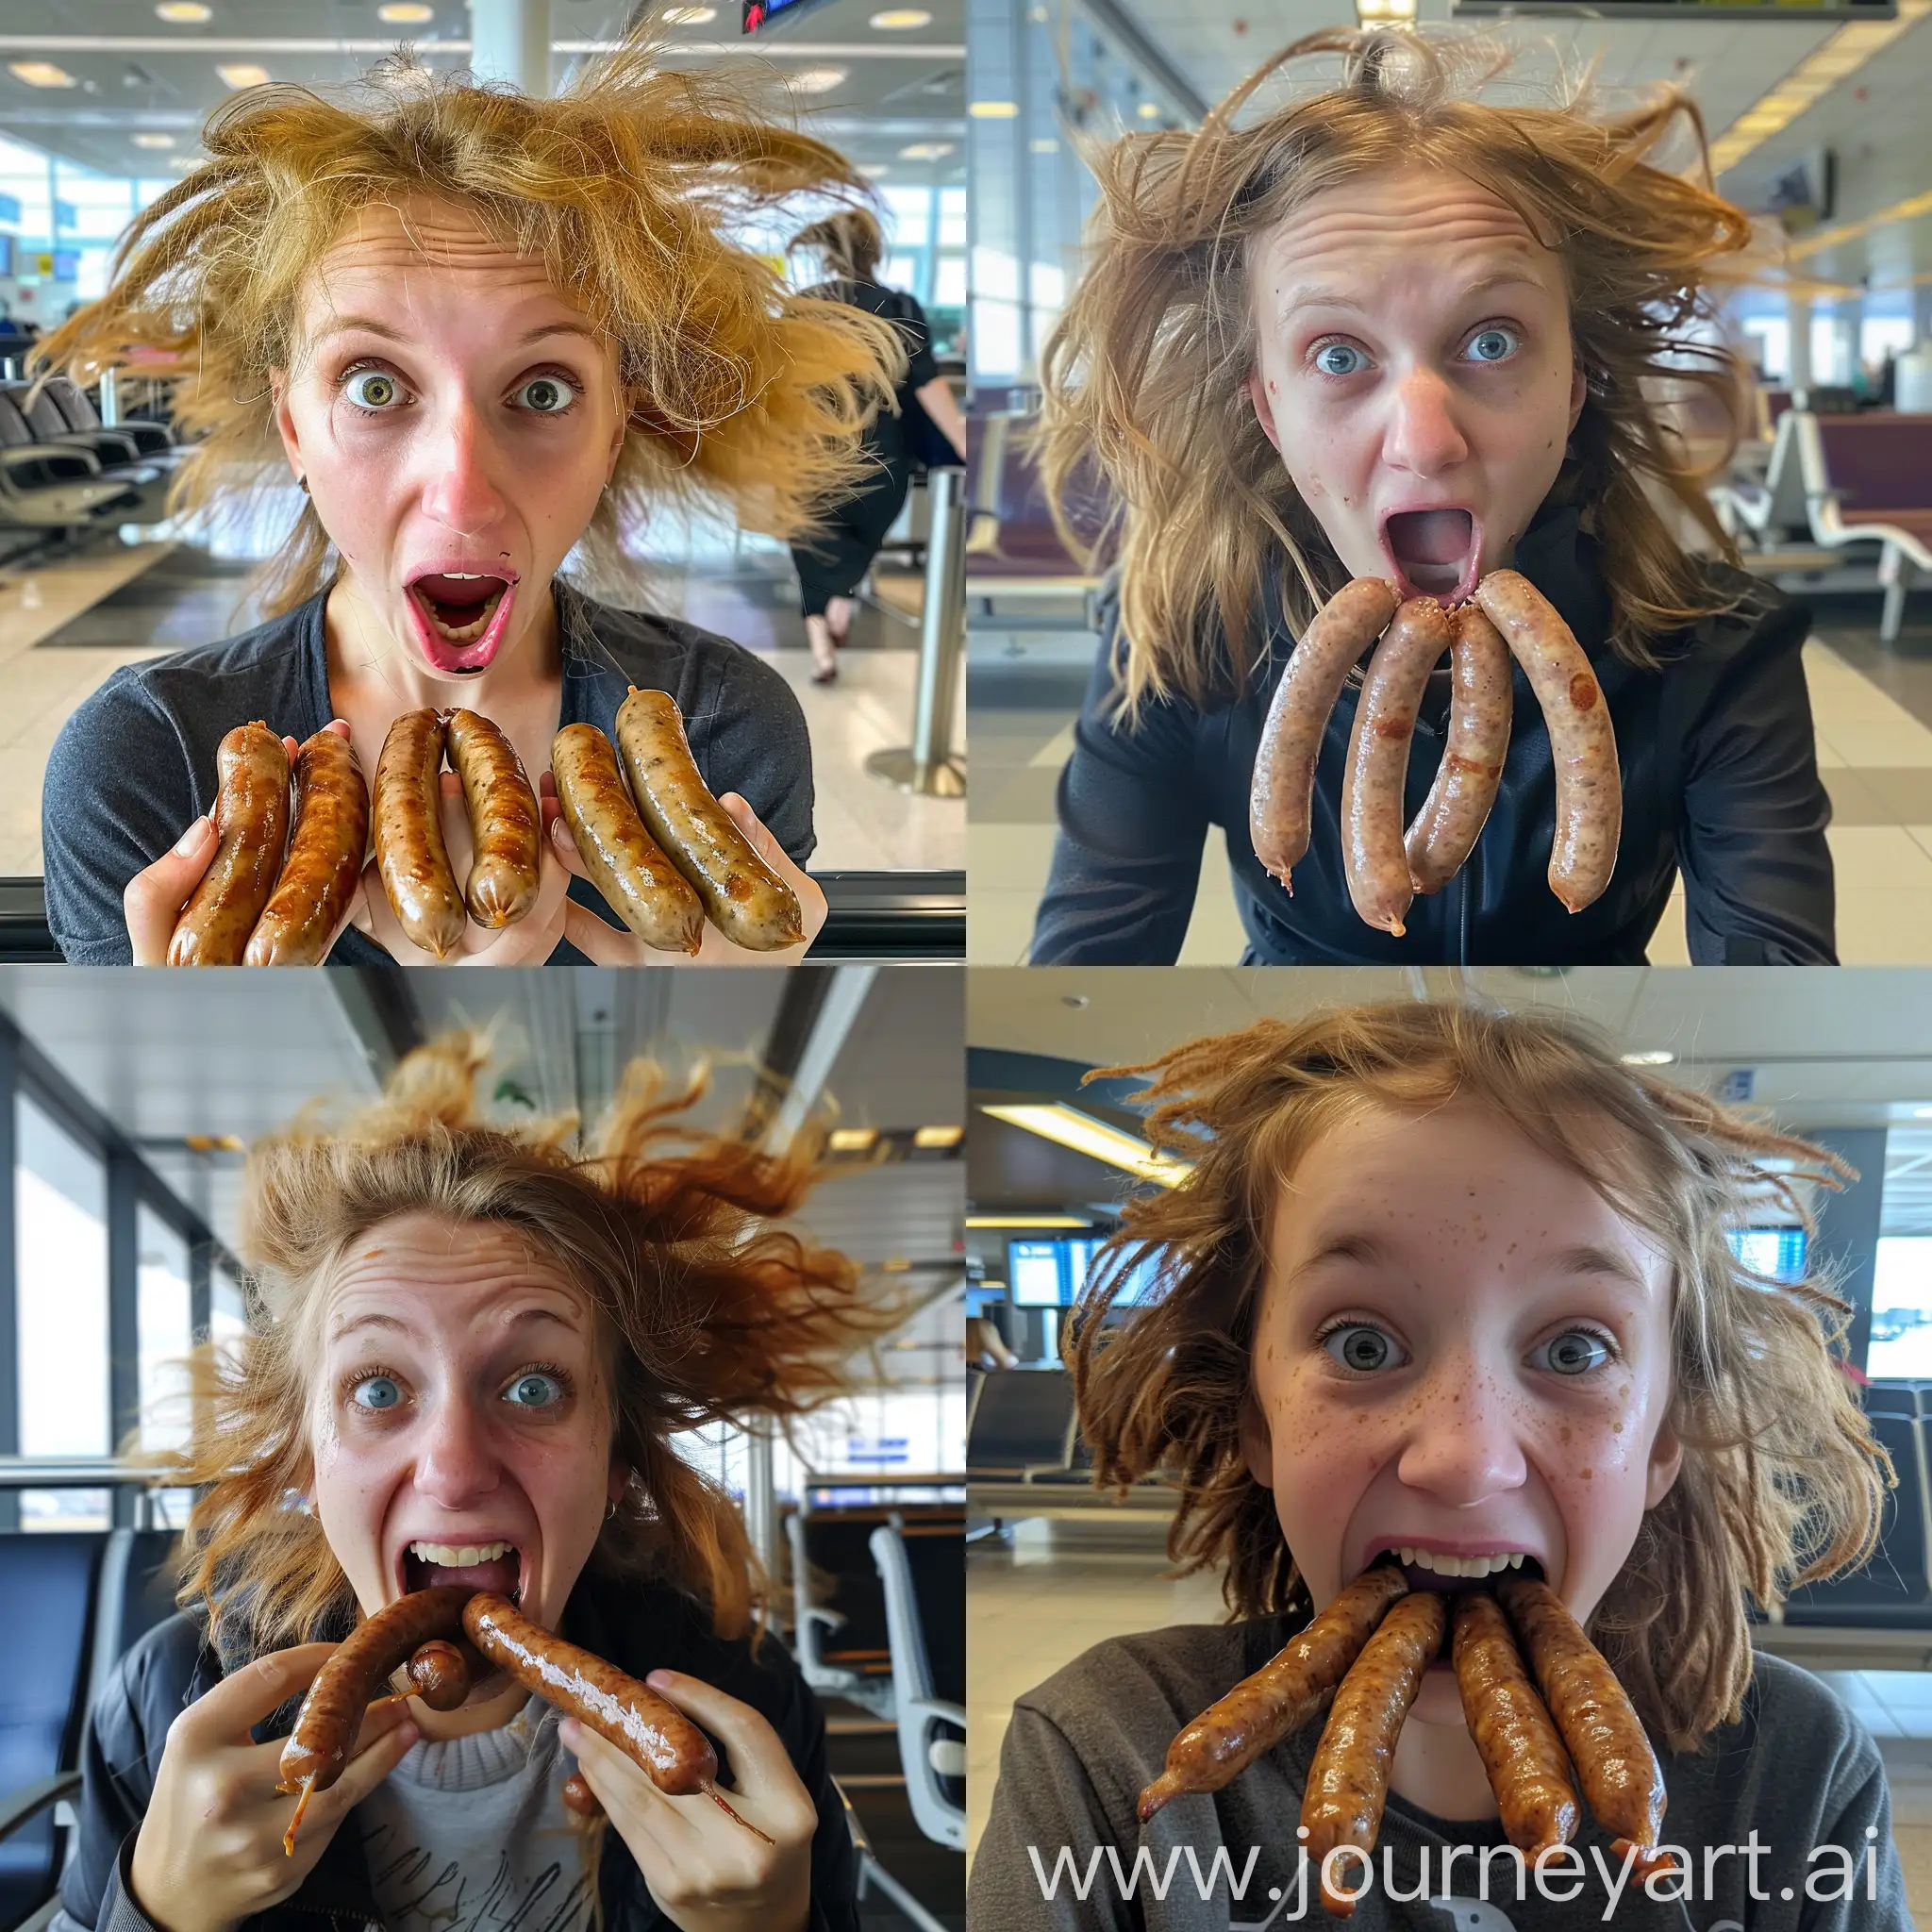 A starving girl with crazy hair after eating 3 sausages at the airport